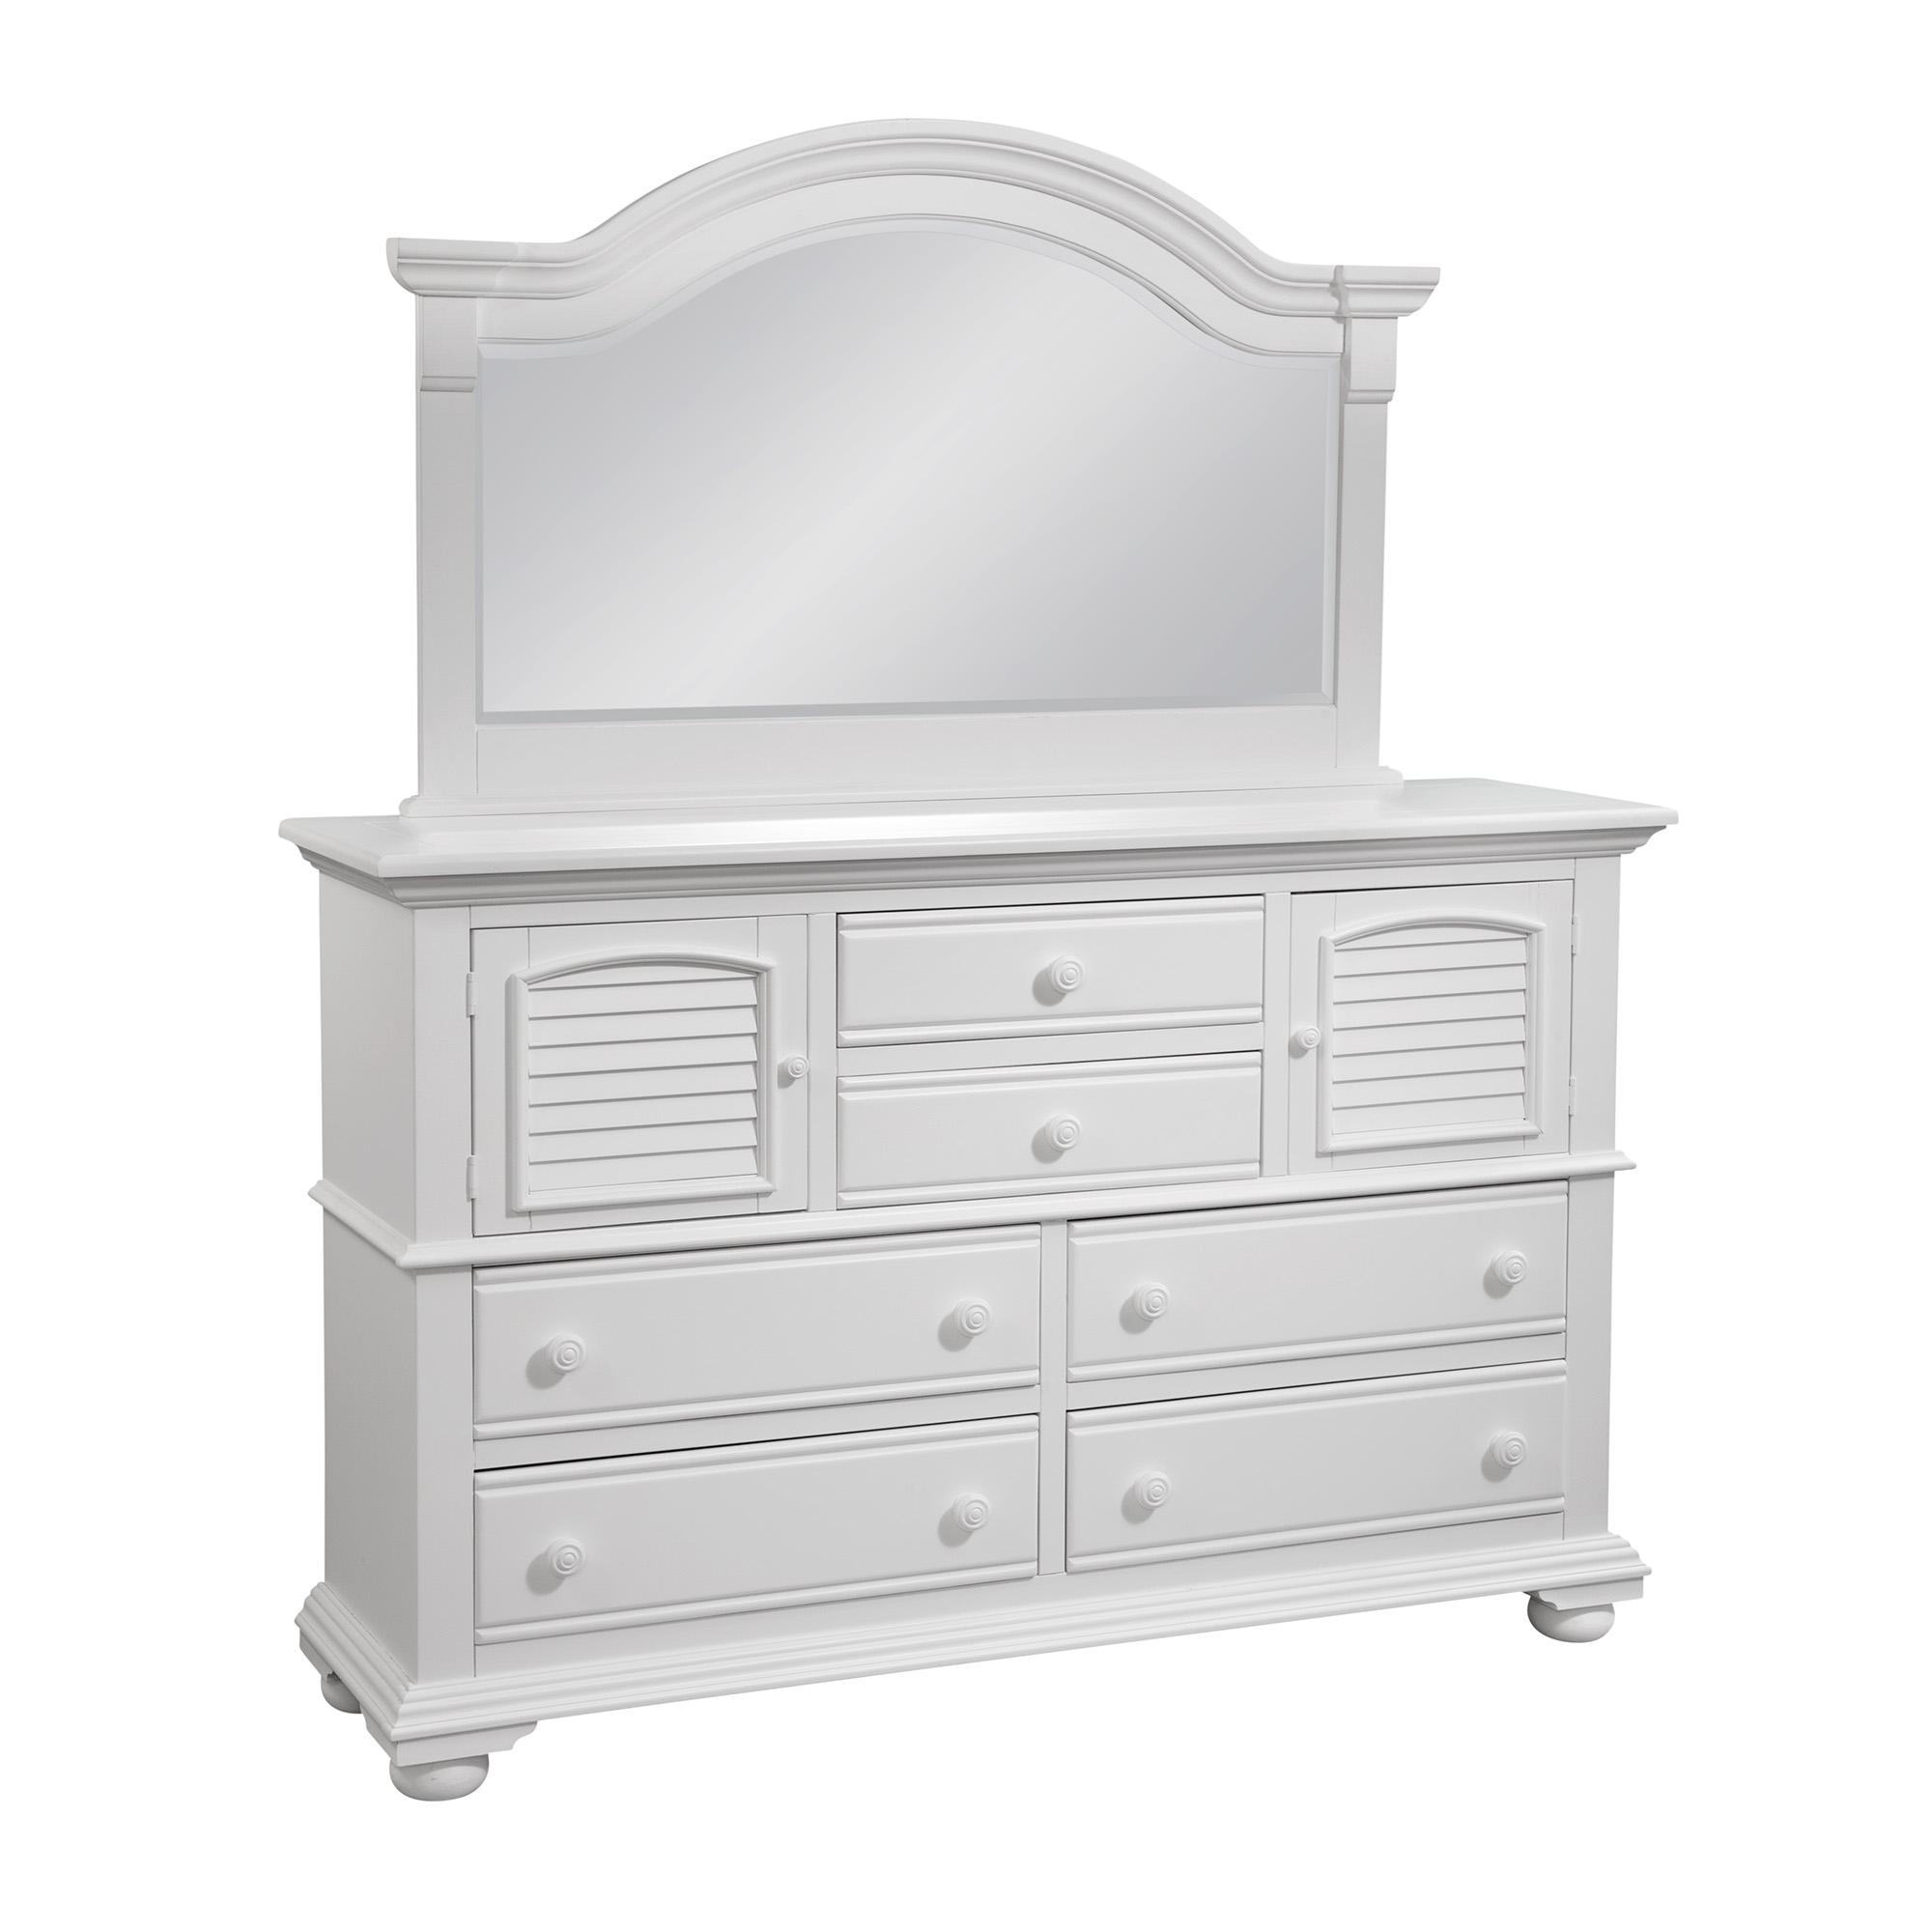 American Woodcrafters COTTAGE 6510-HDLM Dresser With Mirror